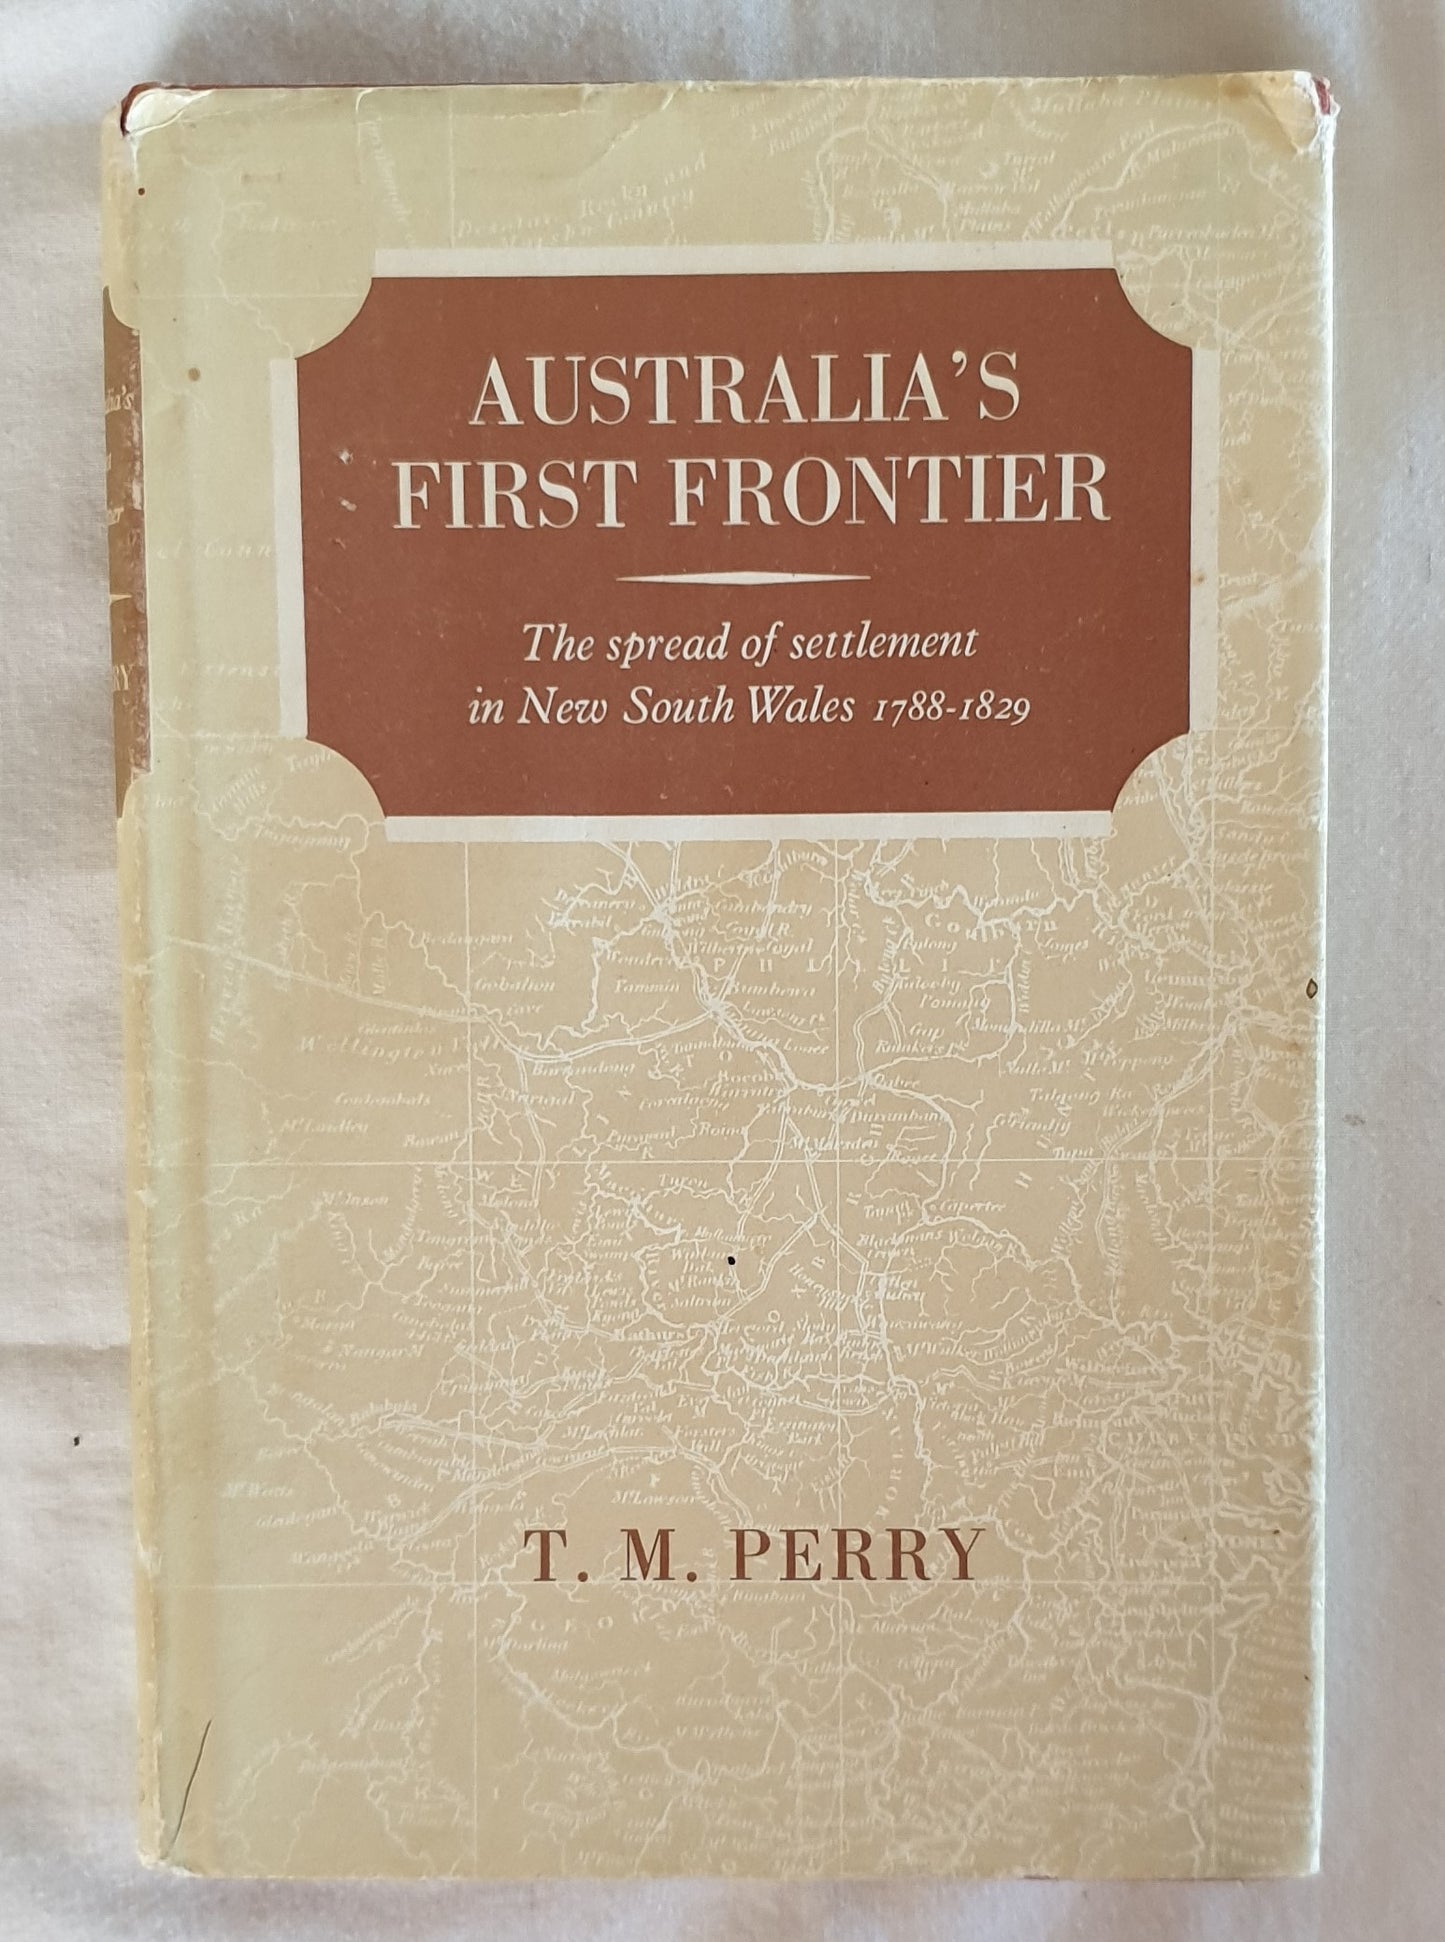 Australia's First Frontier by T. M. Perry